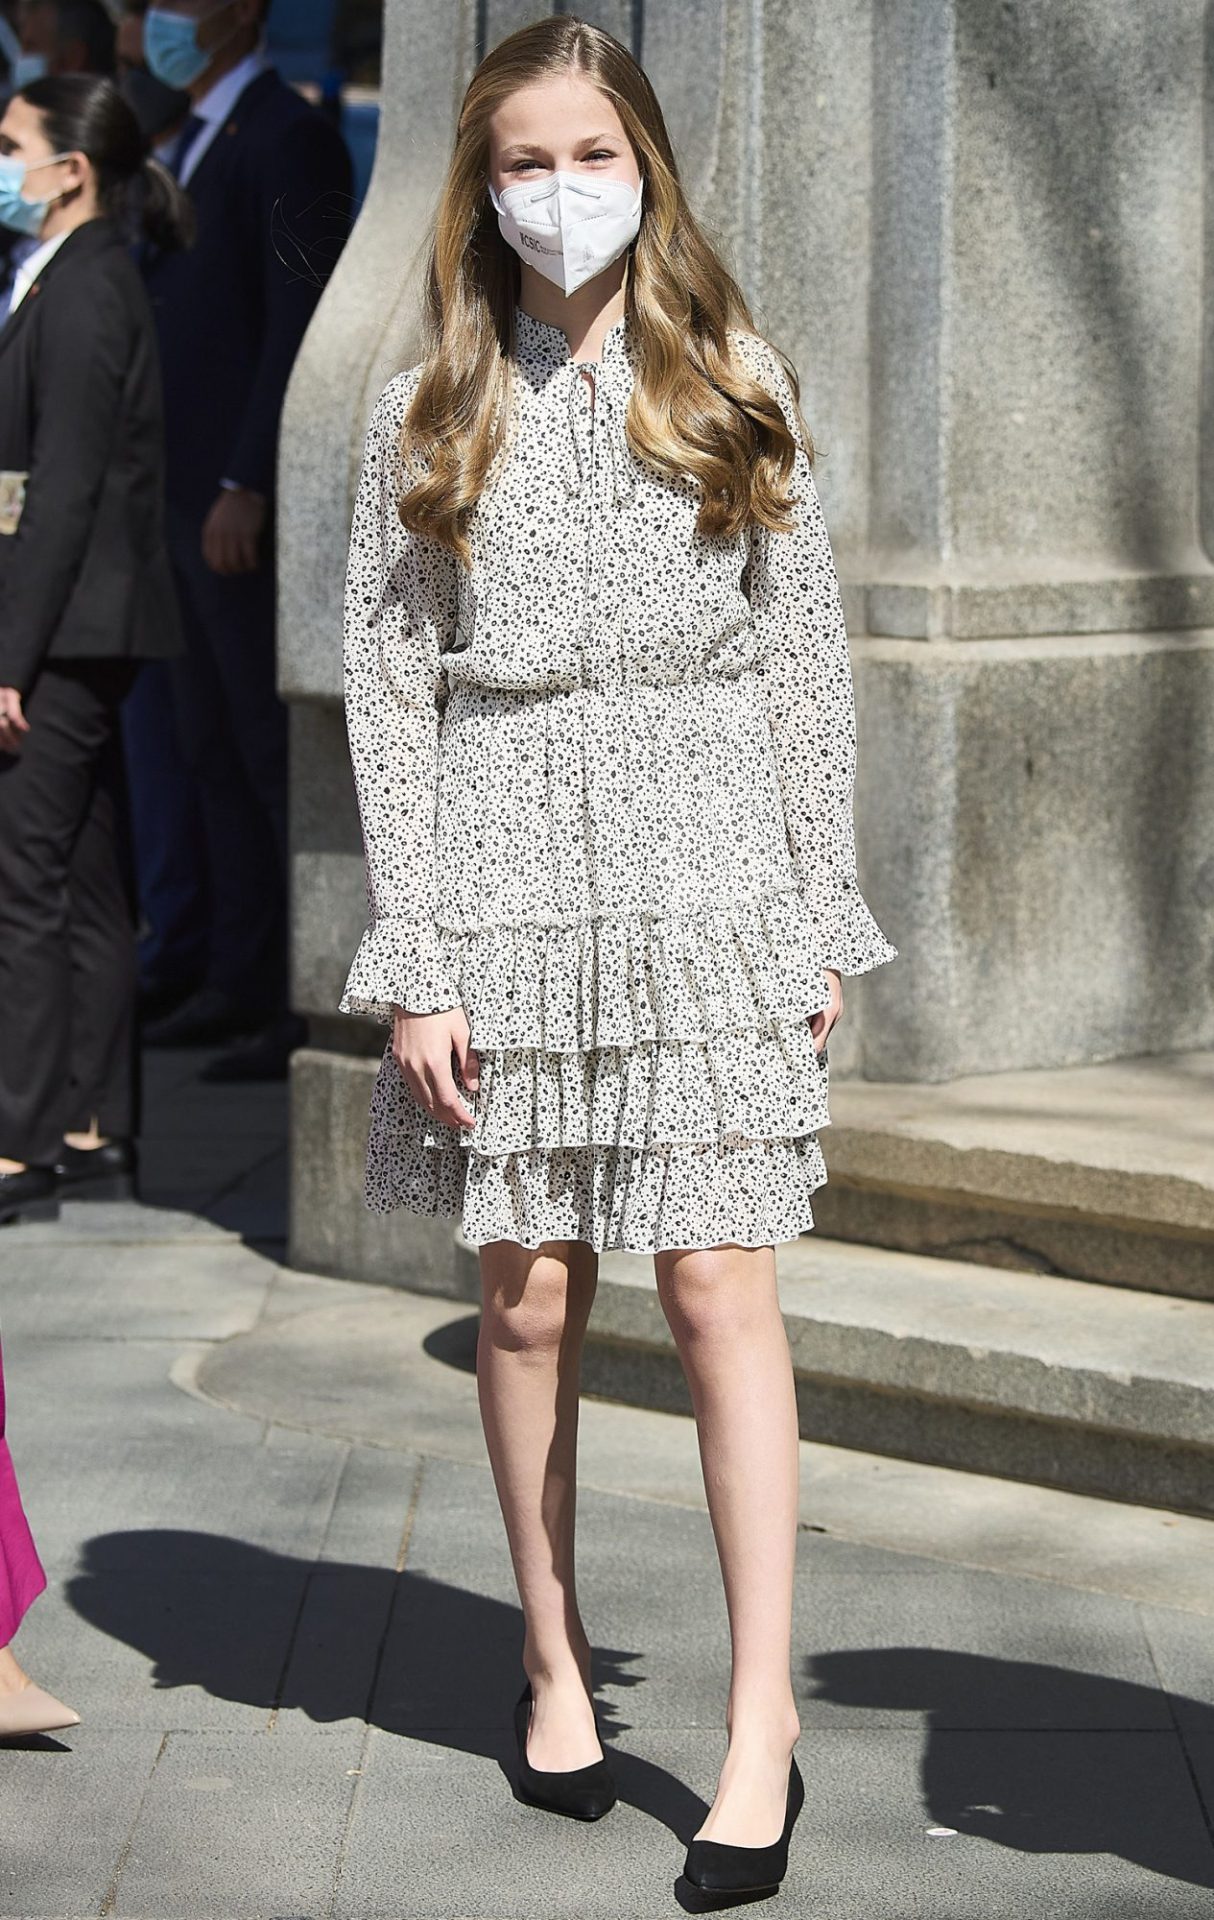 Queen Letizia's daughter Princess Leonor, 15, to carry out first solo  engagement